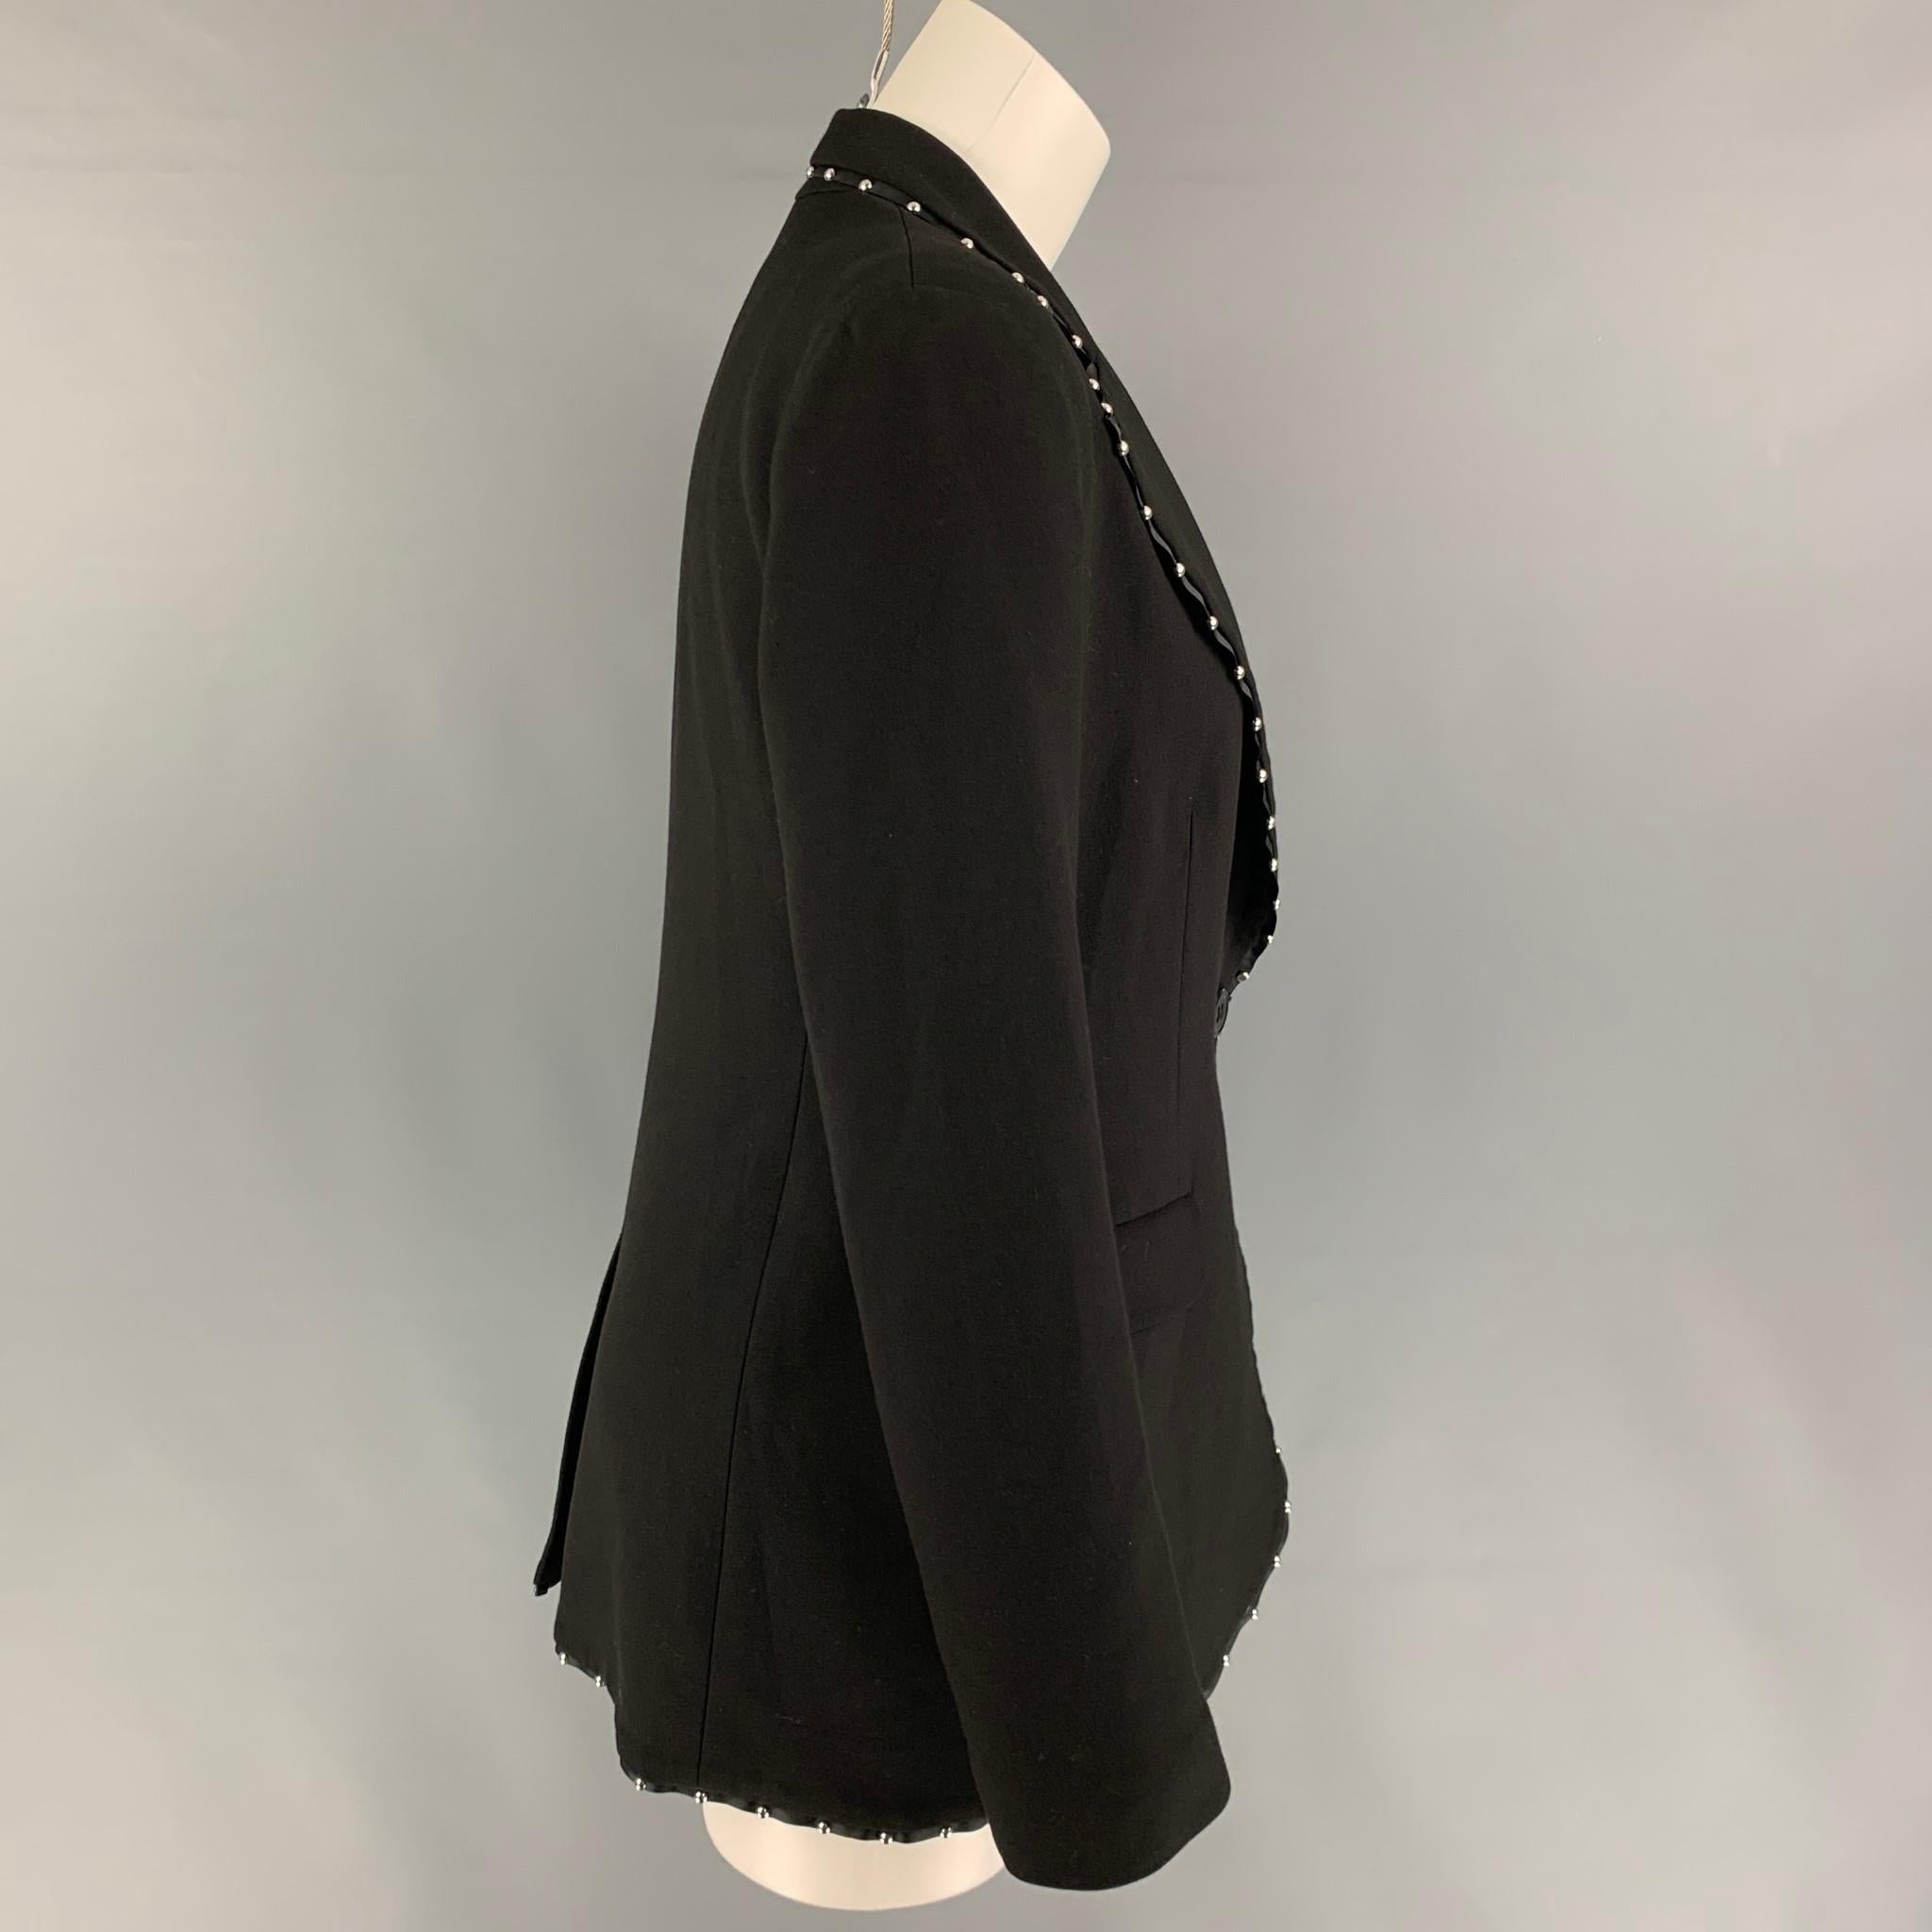 EMPORIO ARMANI jacket comes in a black wool blend with a full liner featuring a notch lapel, studded details, flap pockets, single back vent, and a single button closure. 

Very Good Pre-Owned Condition.
Marked: Size tag